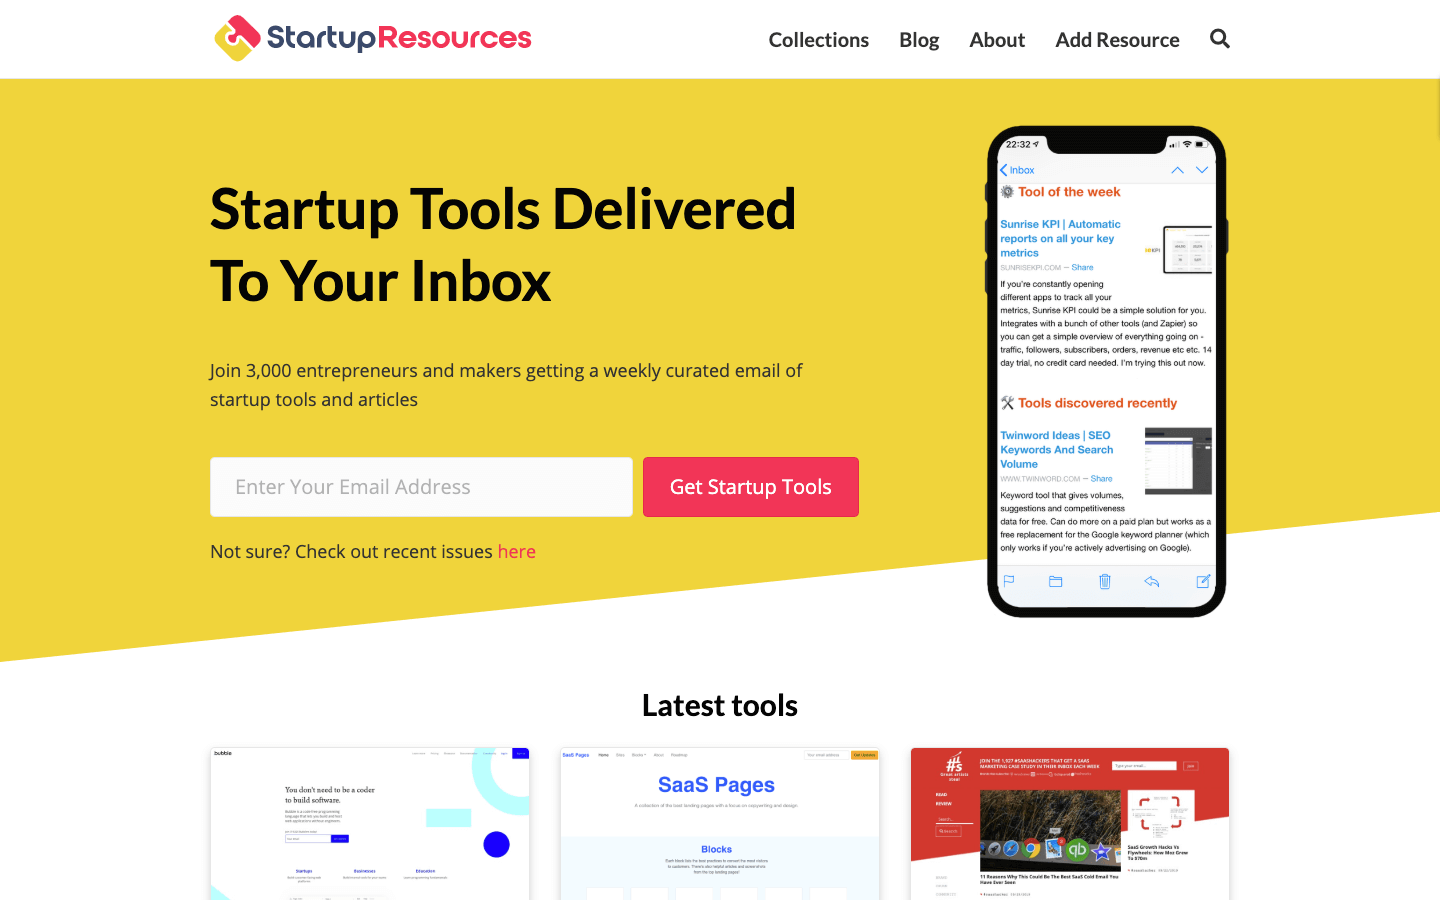 Startup Resources homepage